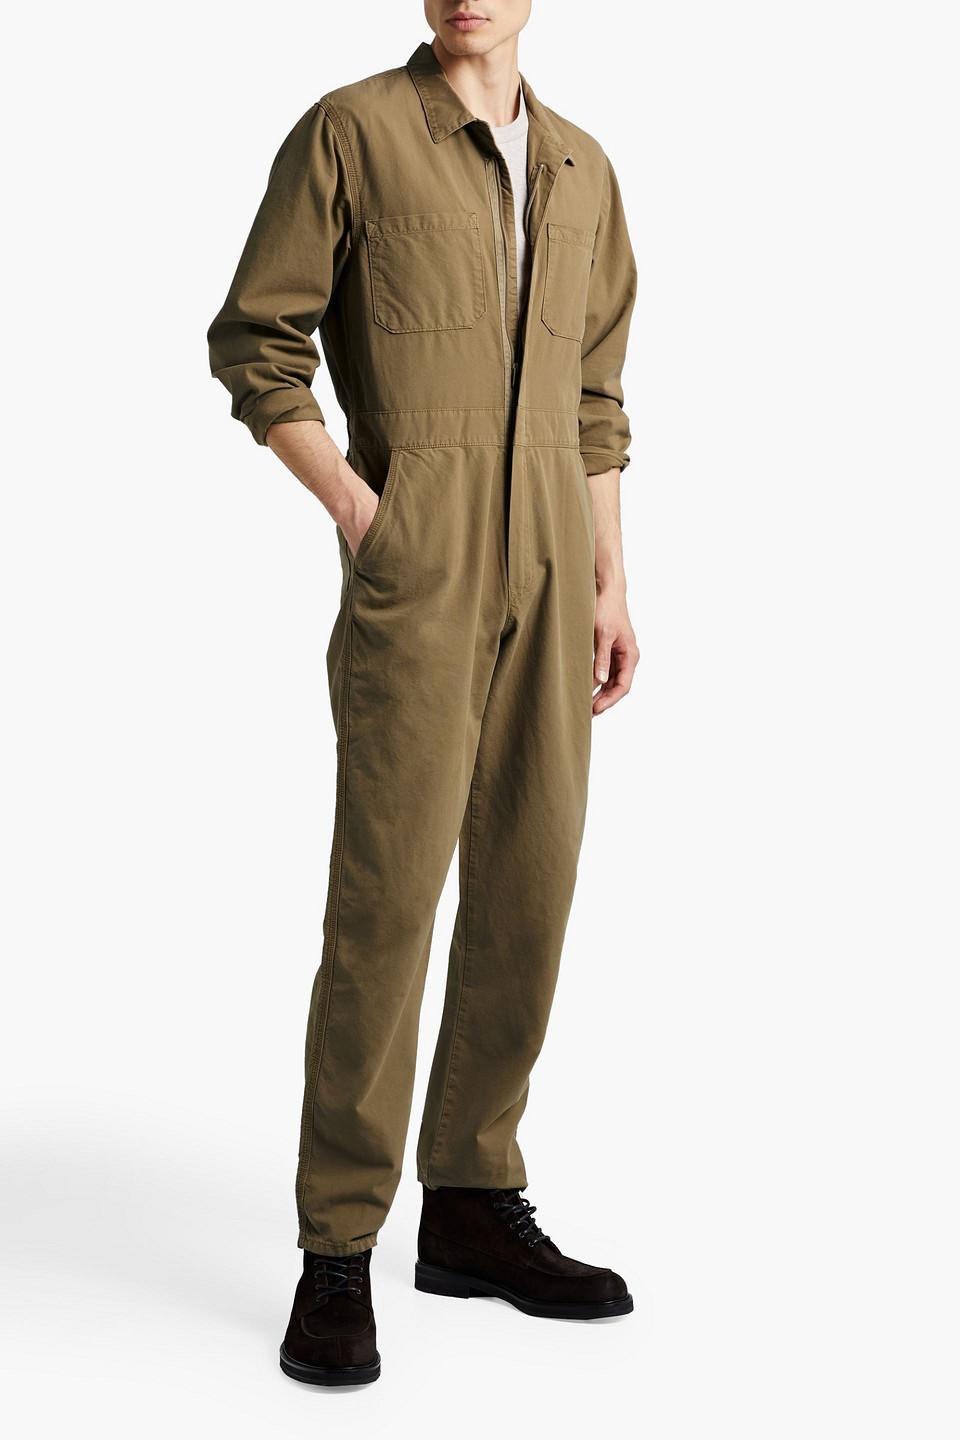 Yeezy Cotton-canvas Jumpsuit in Green for Men | Lyst